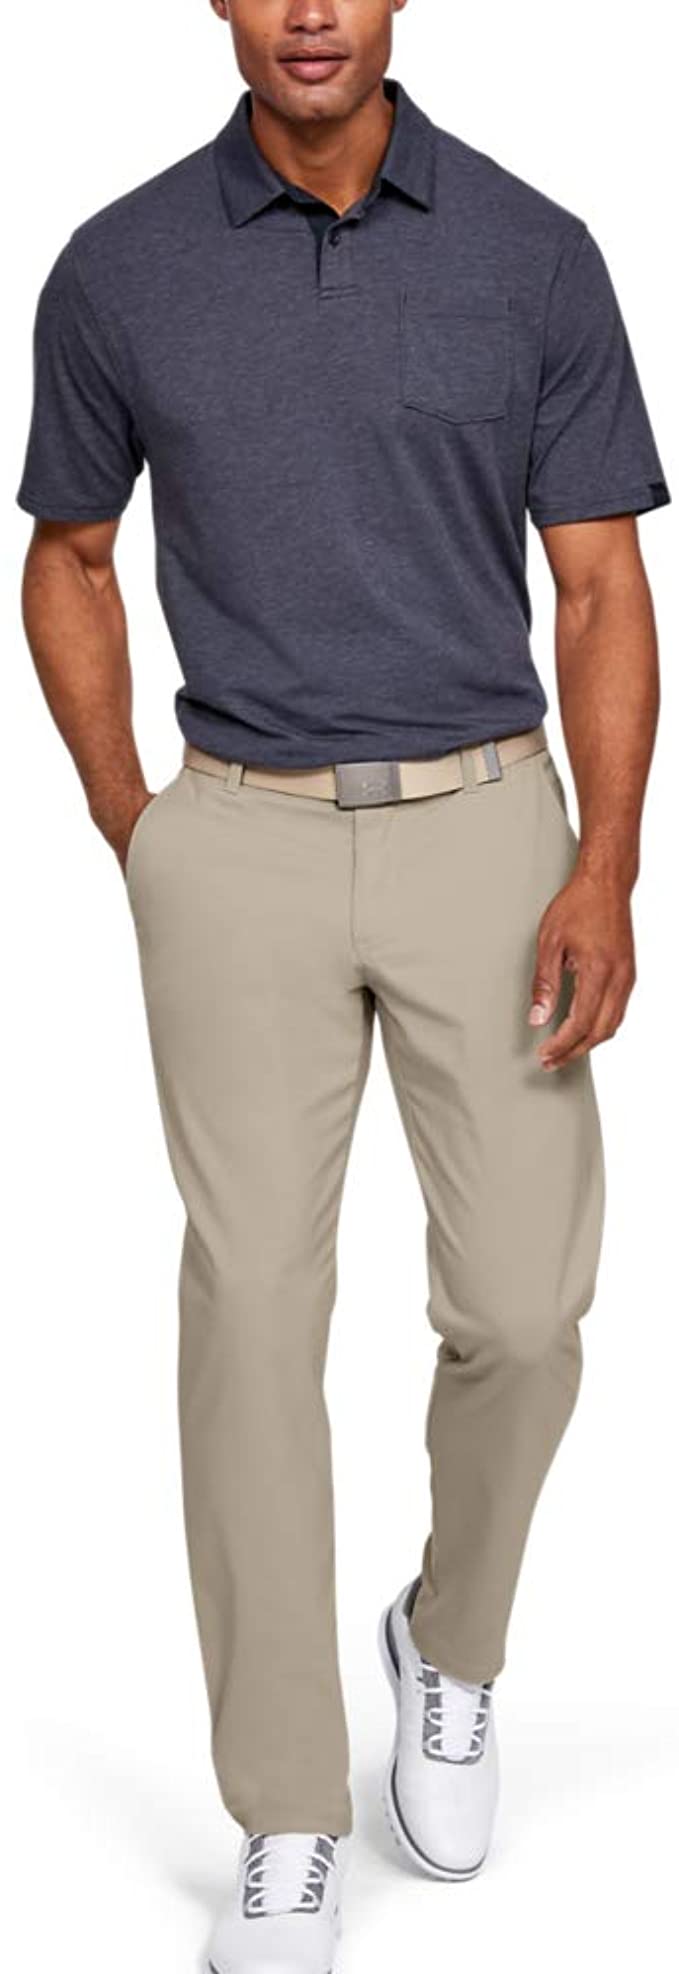 Under Armour Mens Showdown Tapered Golf Pants